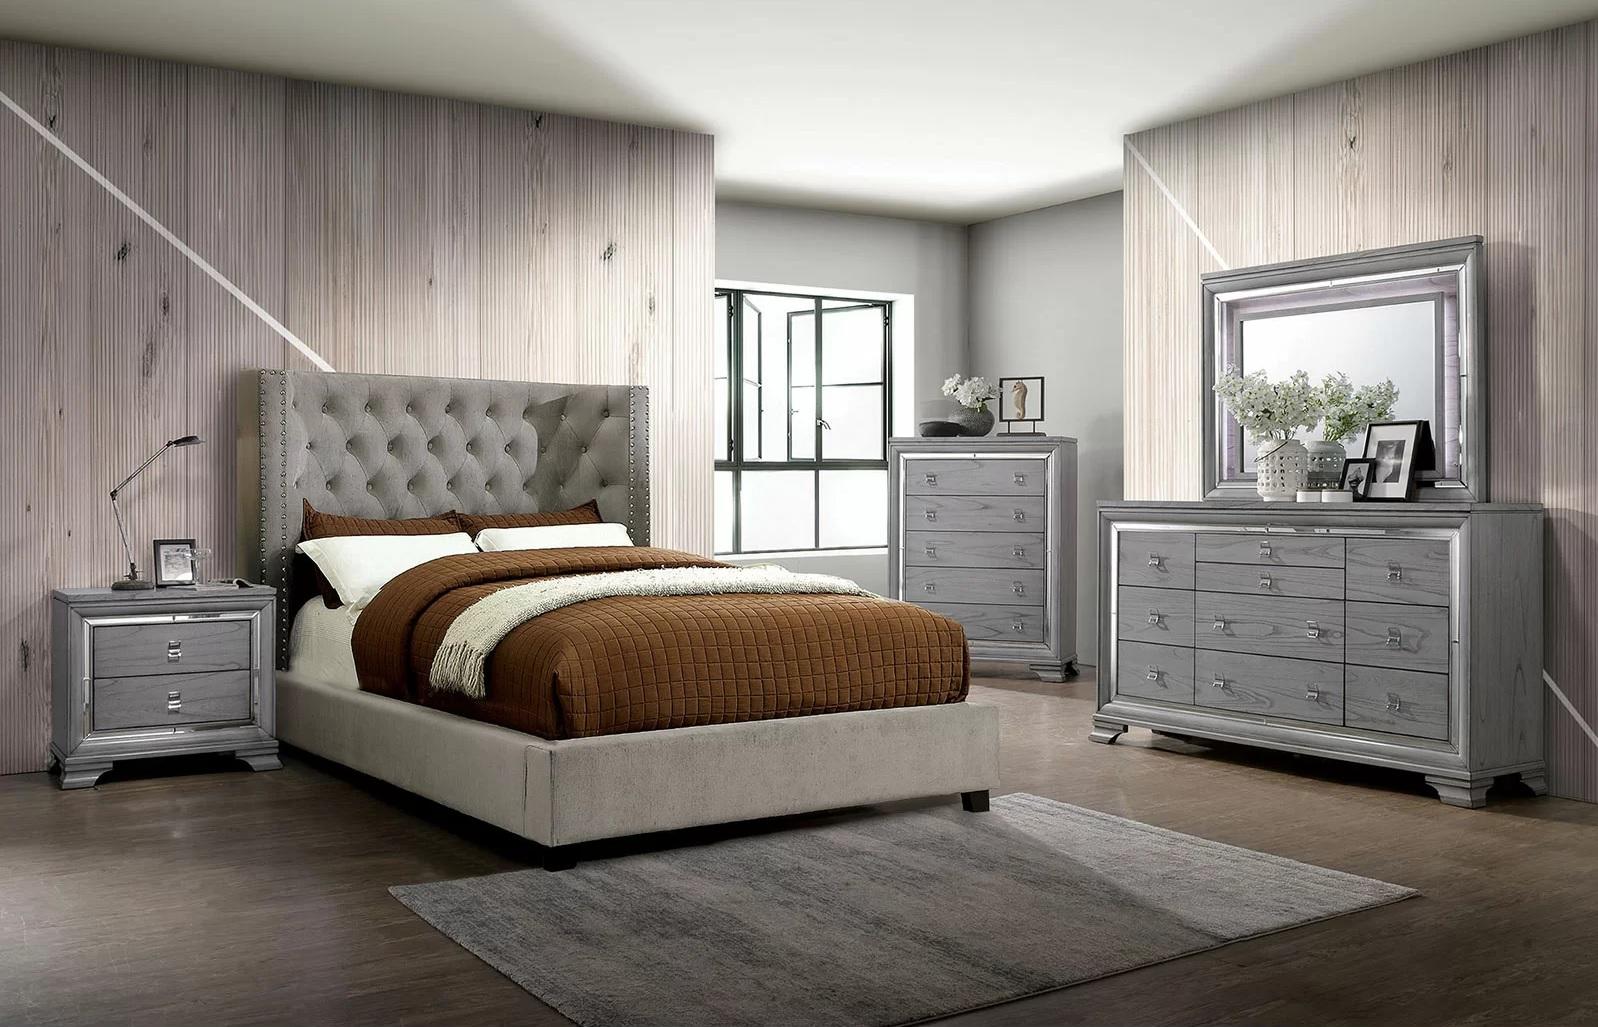 Transitional Platform Bedroom Set CM7779GY-Q-6PC Cayla & Alanis CM7779GY-Q-6PC in Gray 